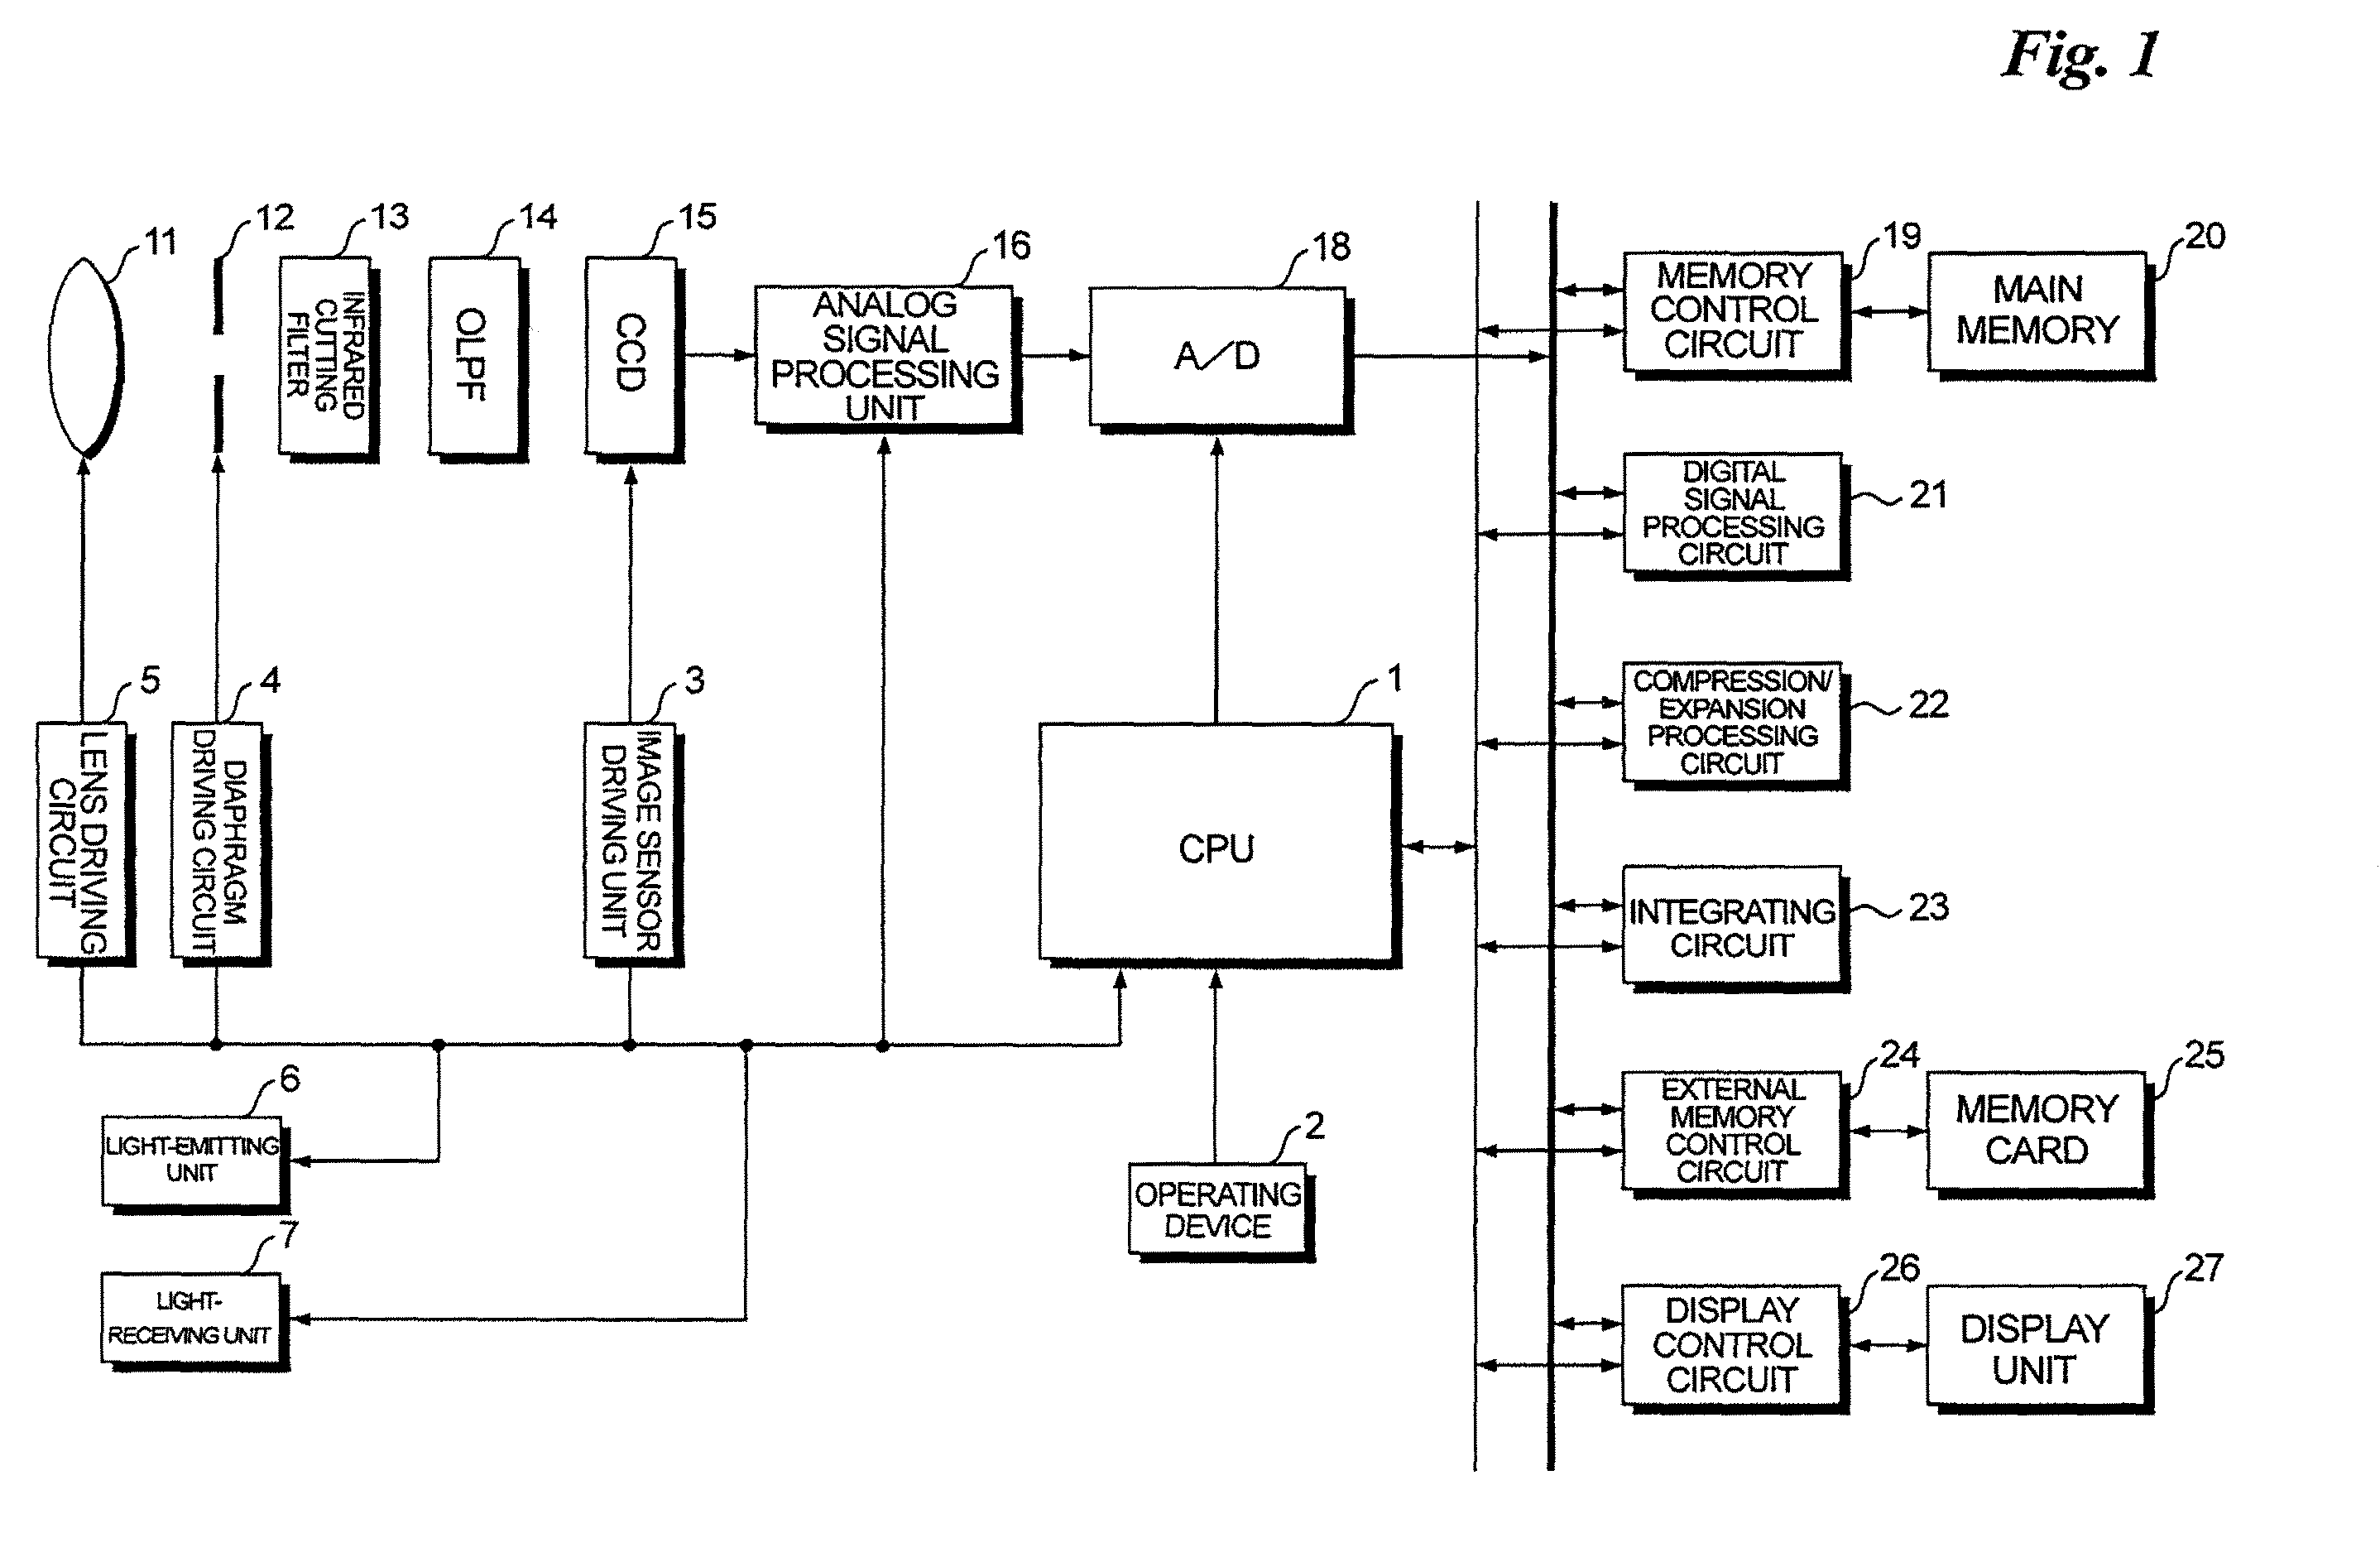 Motion detection apparatus and method